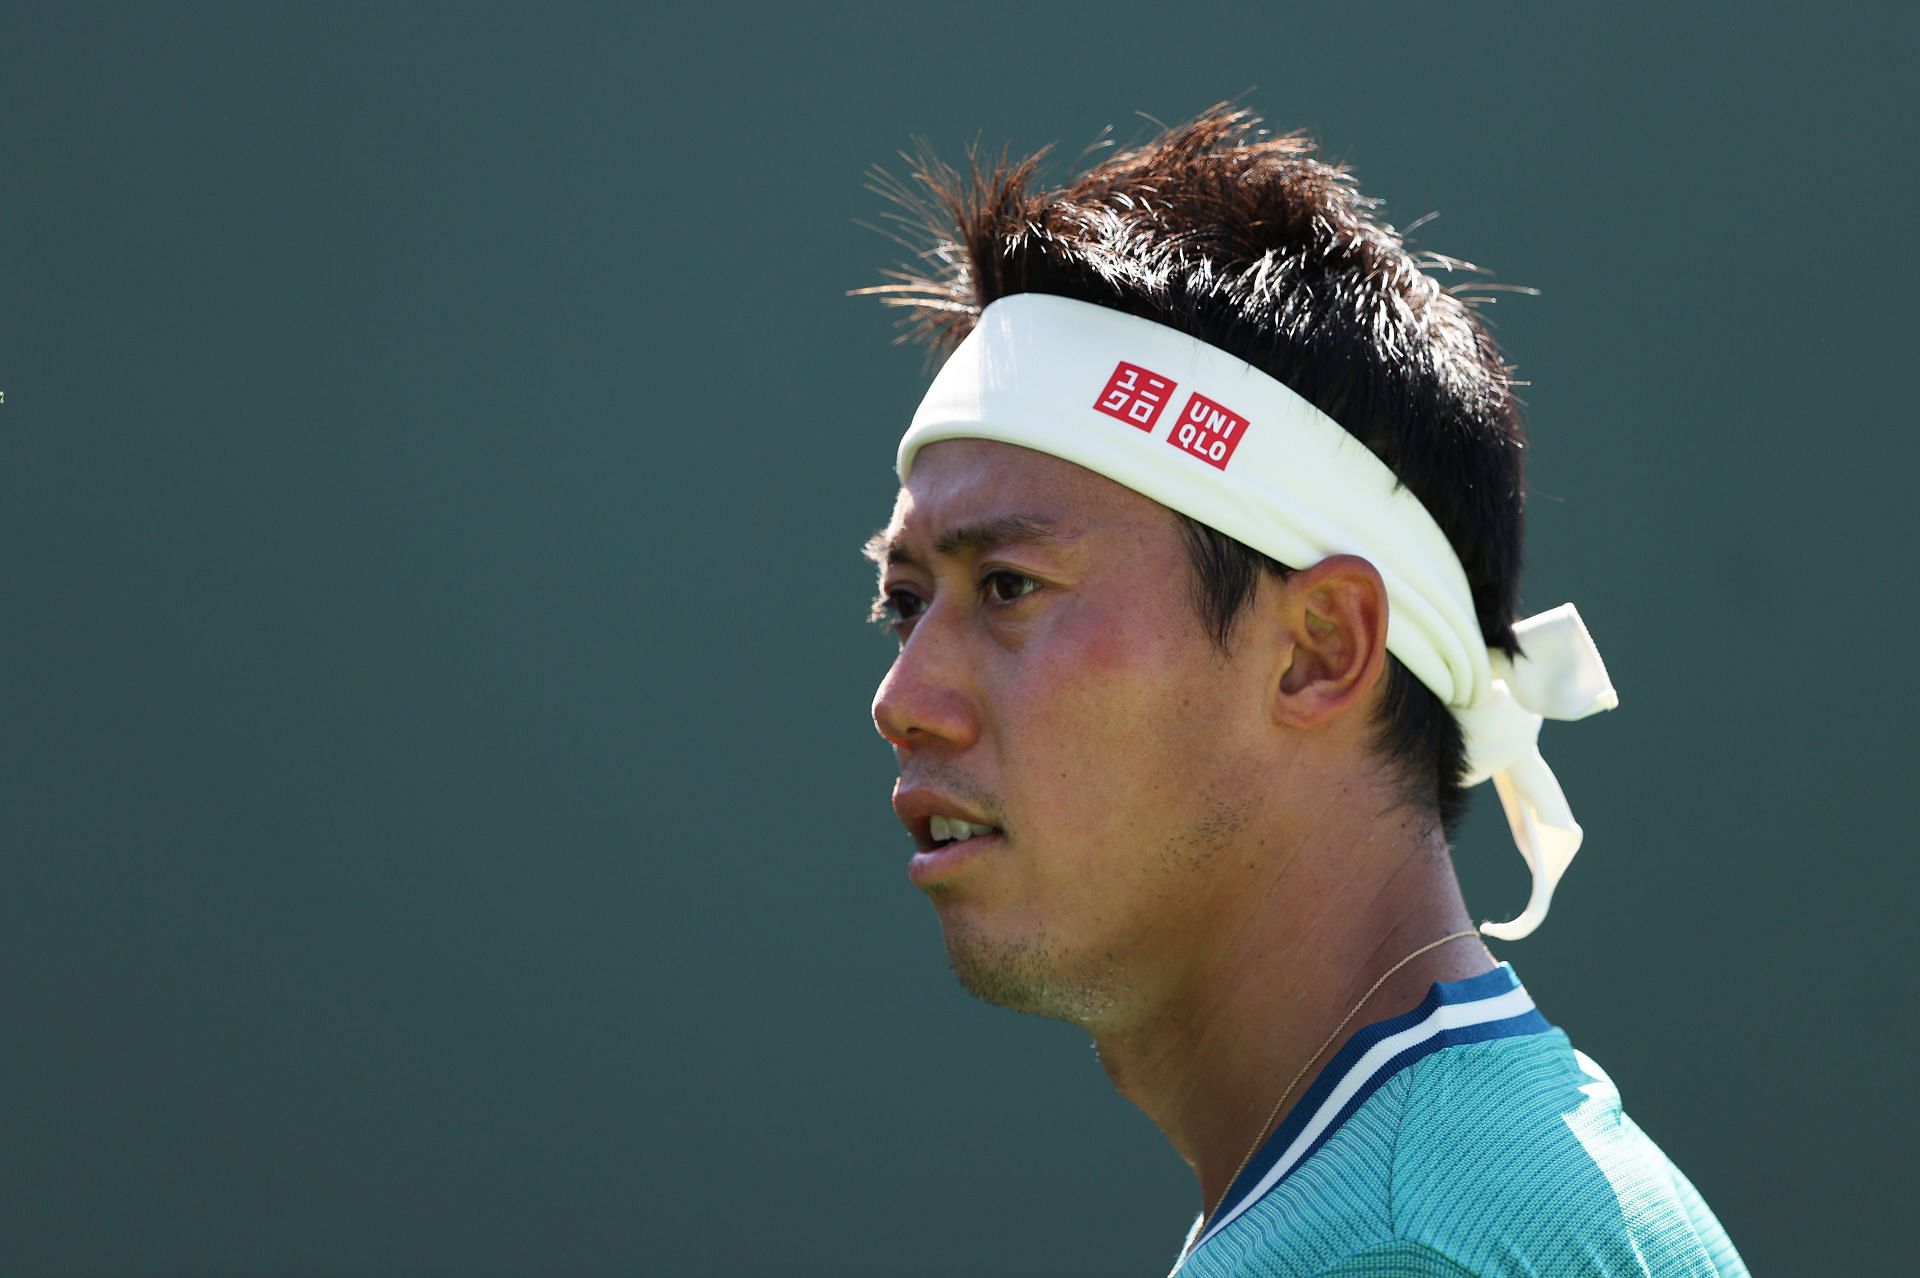 Nishikori has not played since the 2021 Indian Wells Masters